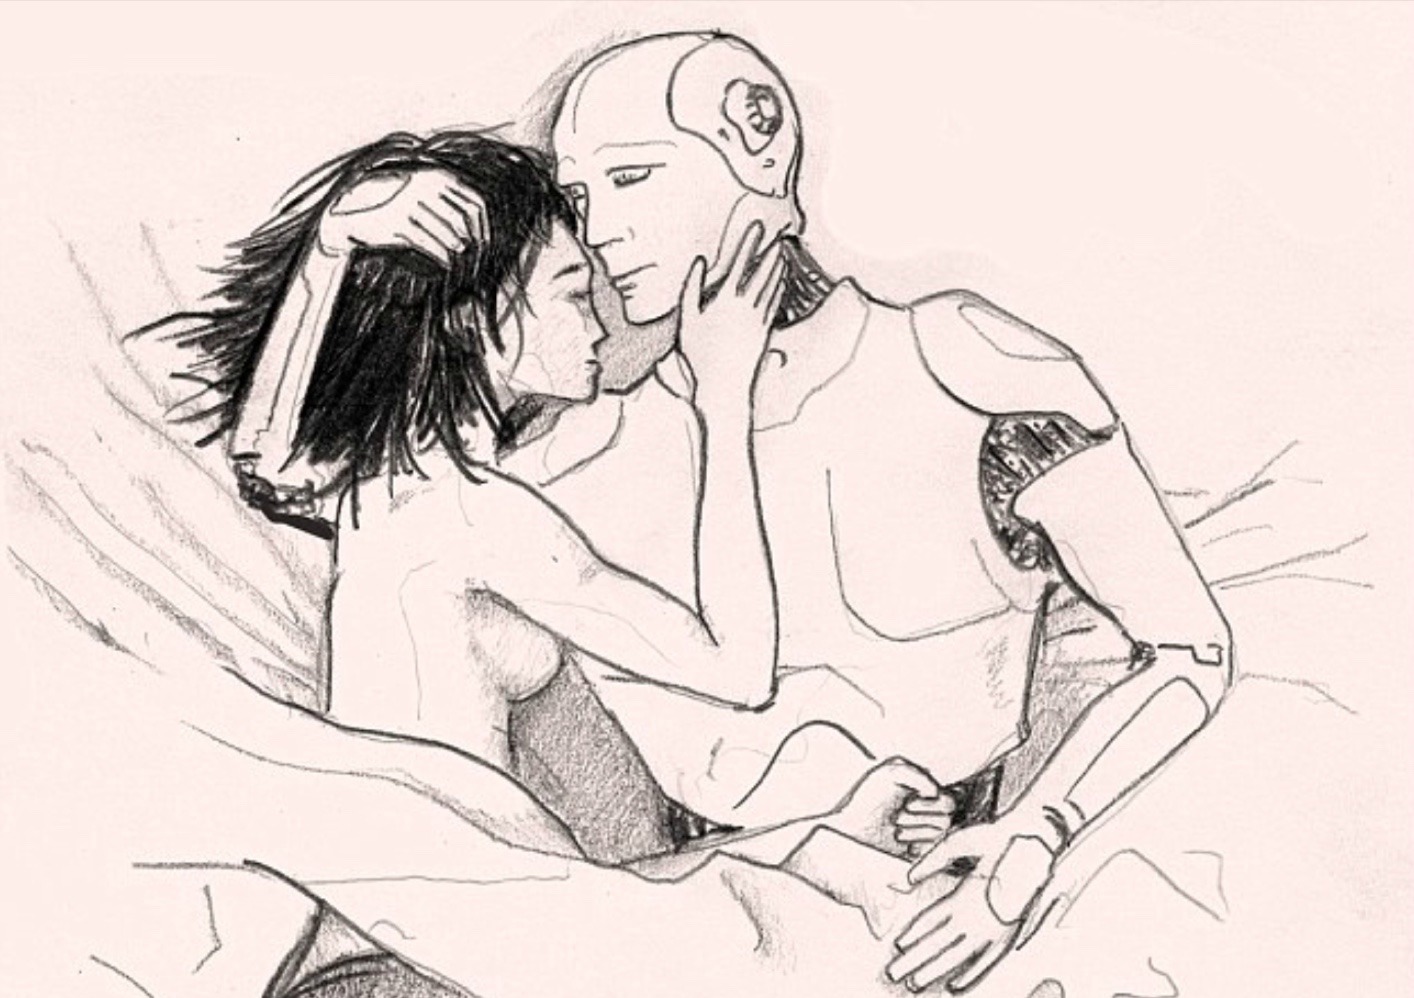 Geek insider, geekinsider, geekinsider. Com,, the future of sex: robophilia to rule in 2050, news